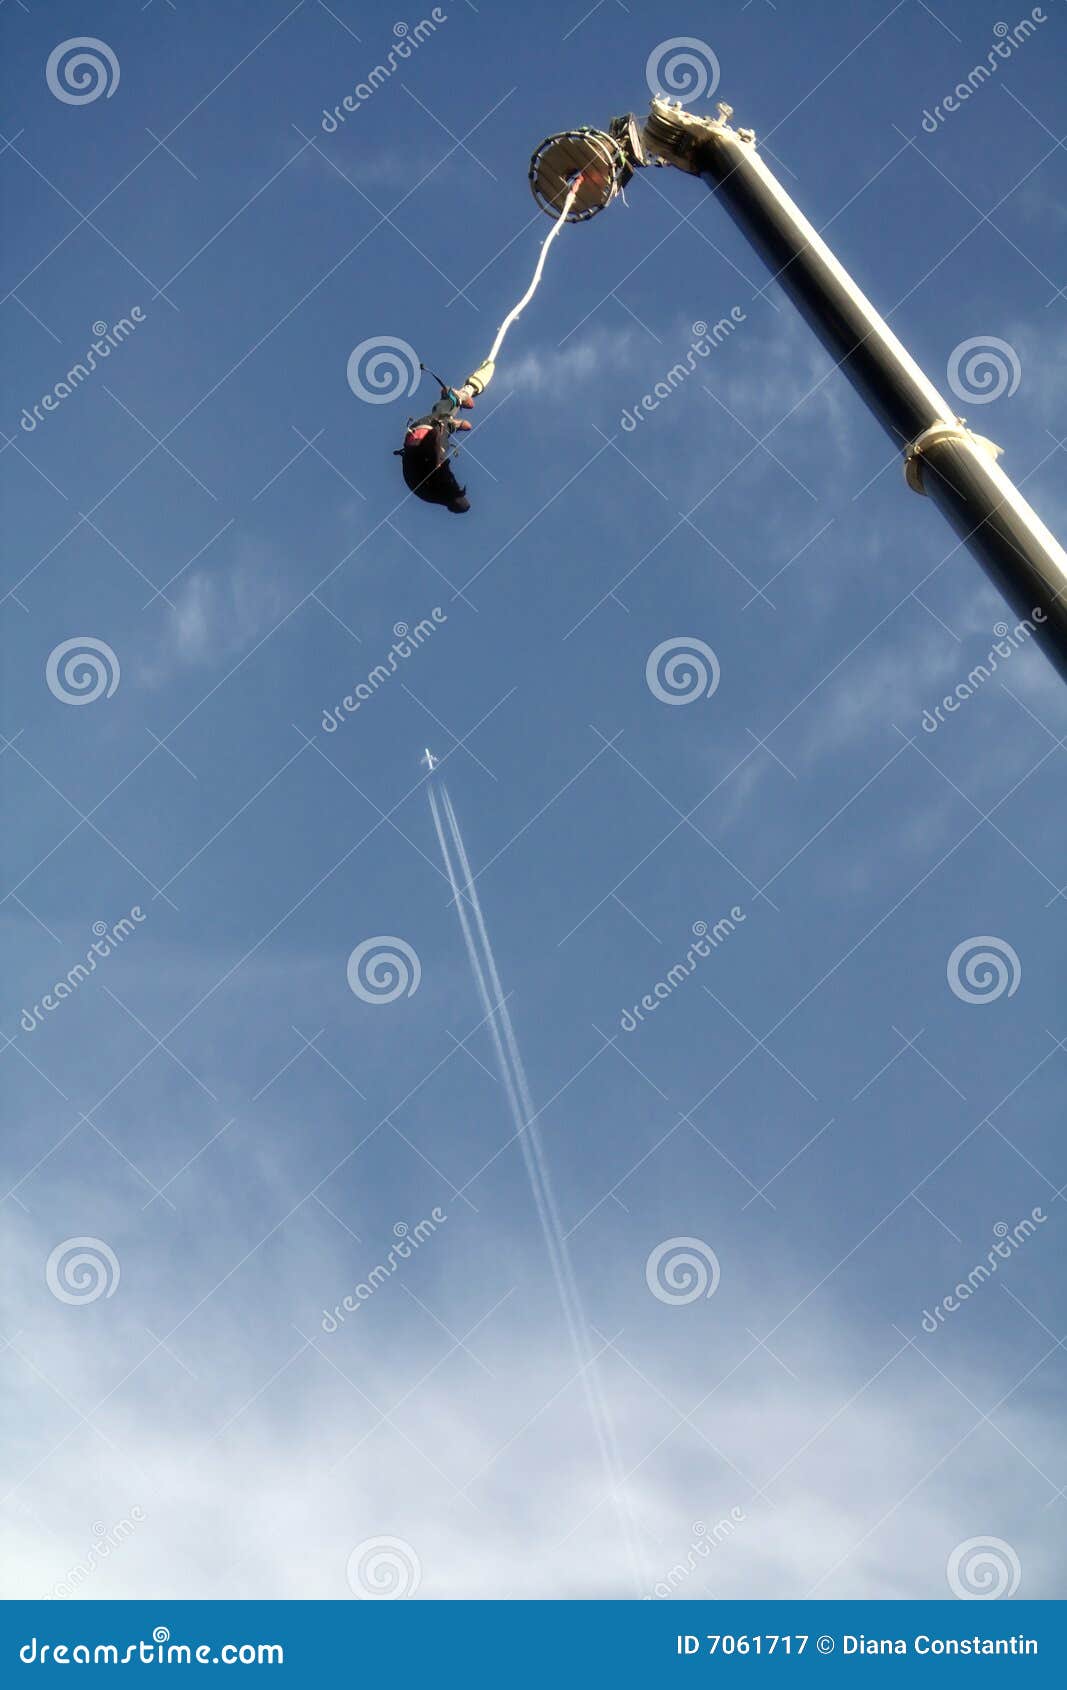 Bungee Jumping and an Airplane Stock Image - Image of bungee, object ...